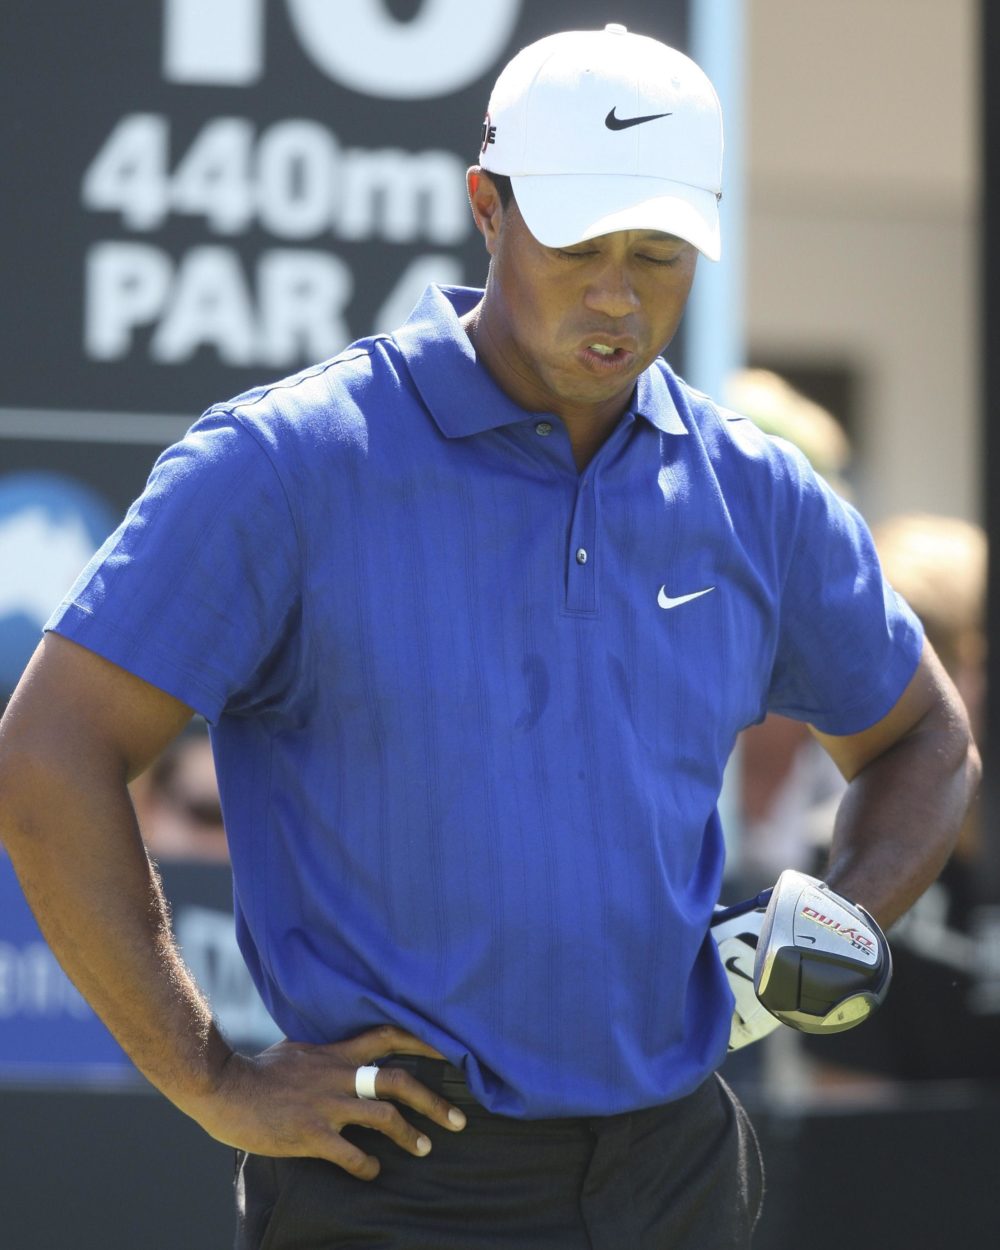 Tiger Woods receives some bad news, both on and off the course.